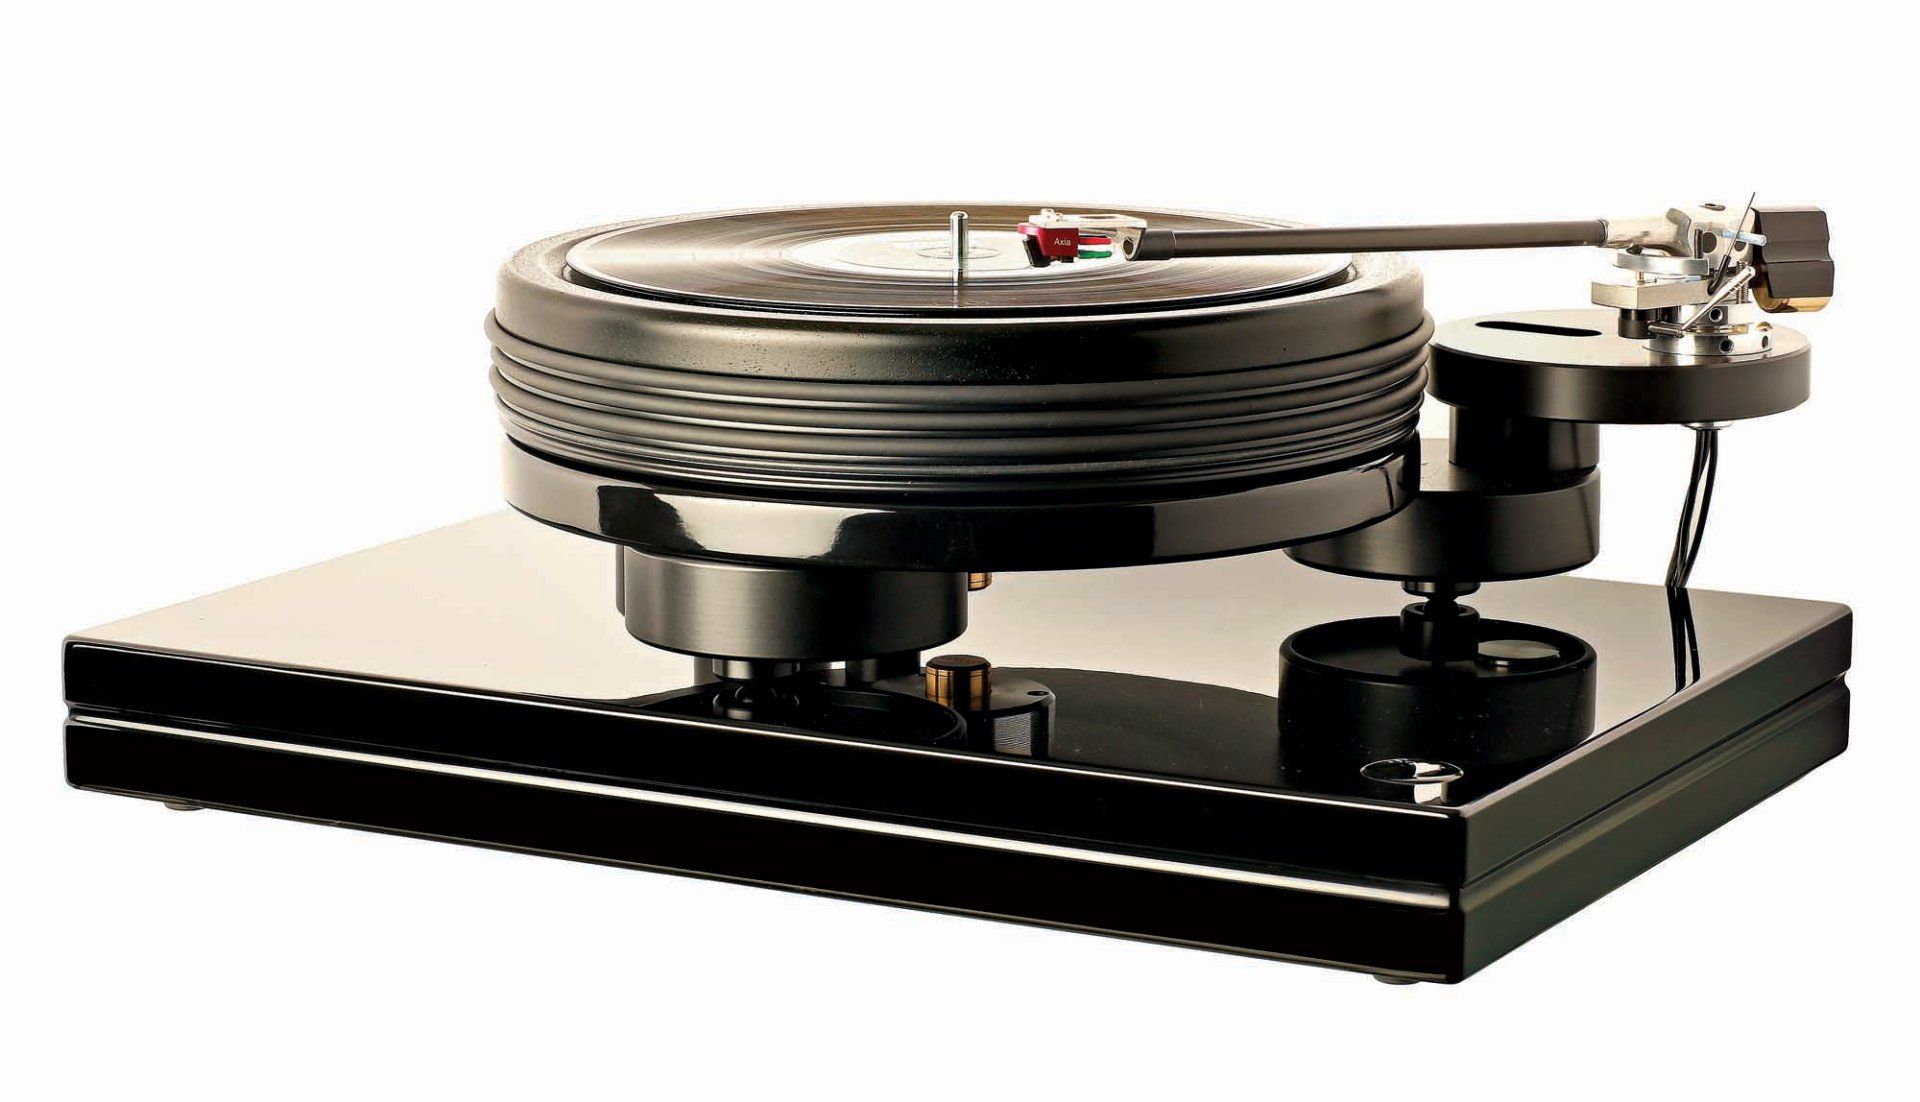 Space 294 turntable with 12